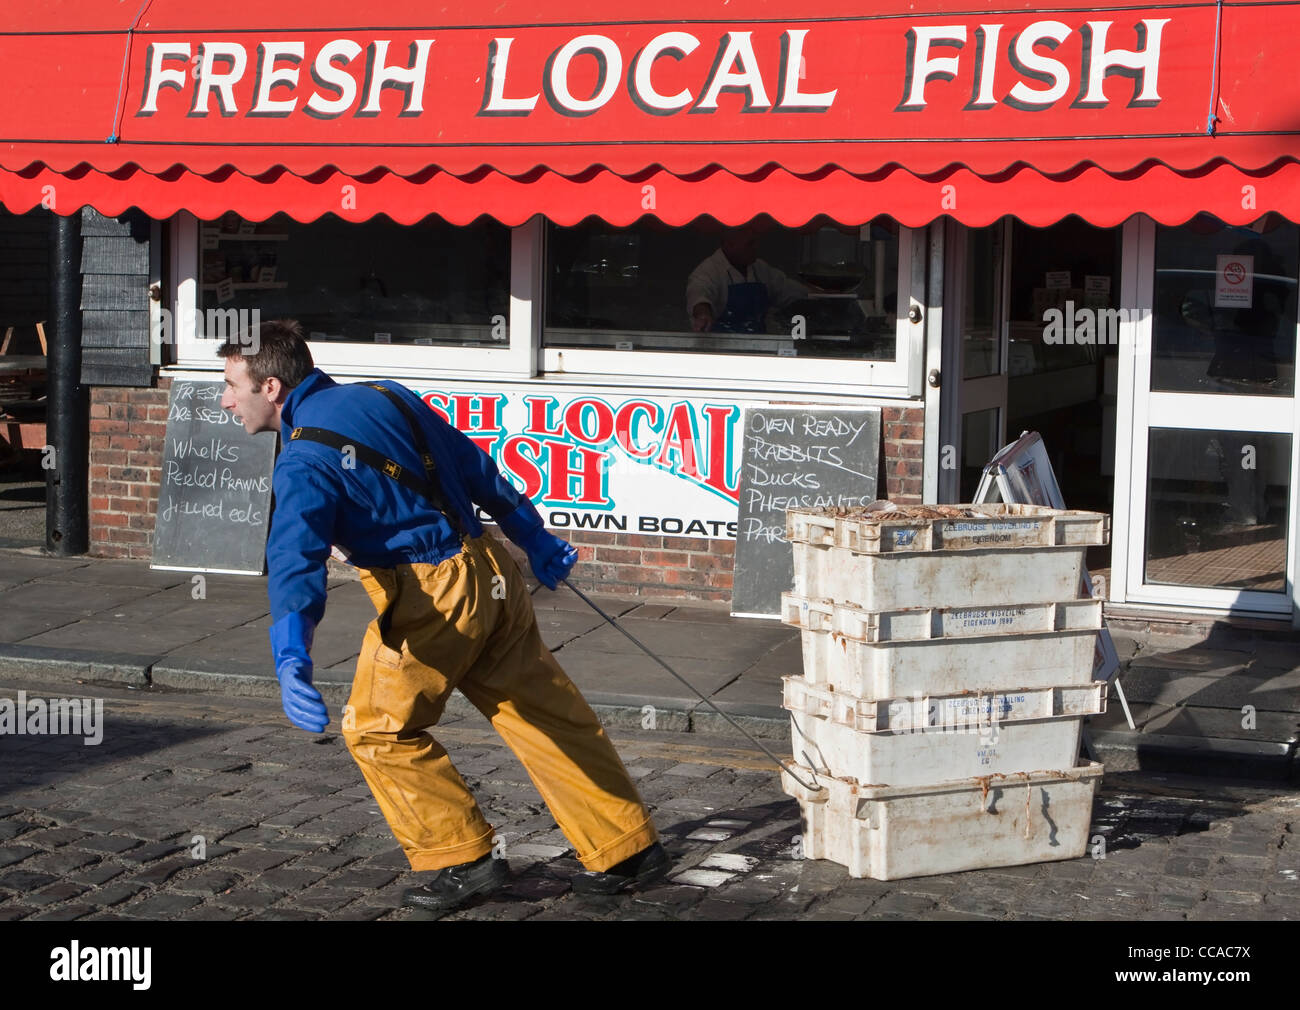 Fisherman Pulling Crates of Fish in front of a Fresh Fish Shop in Folkestone Kent Stock Photo